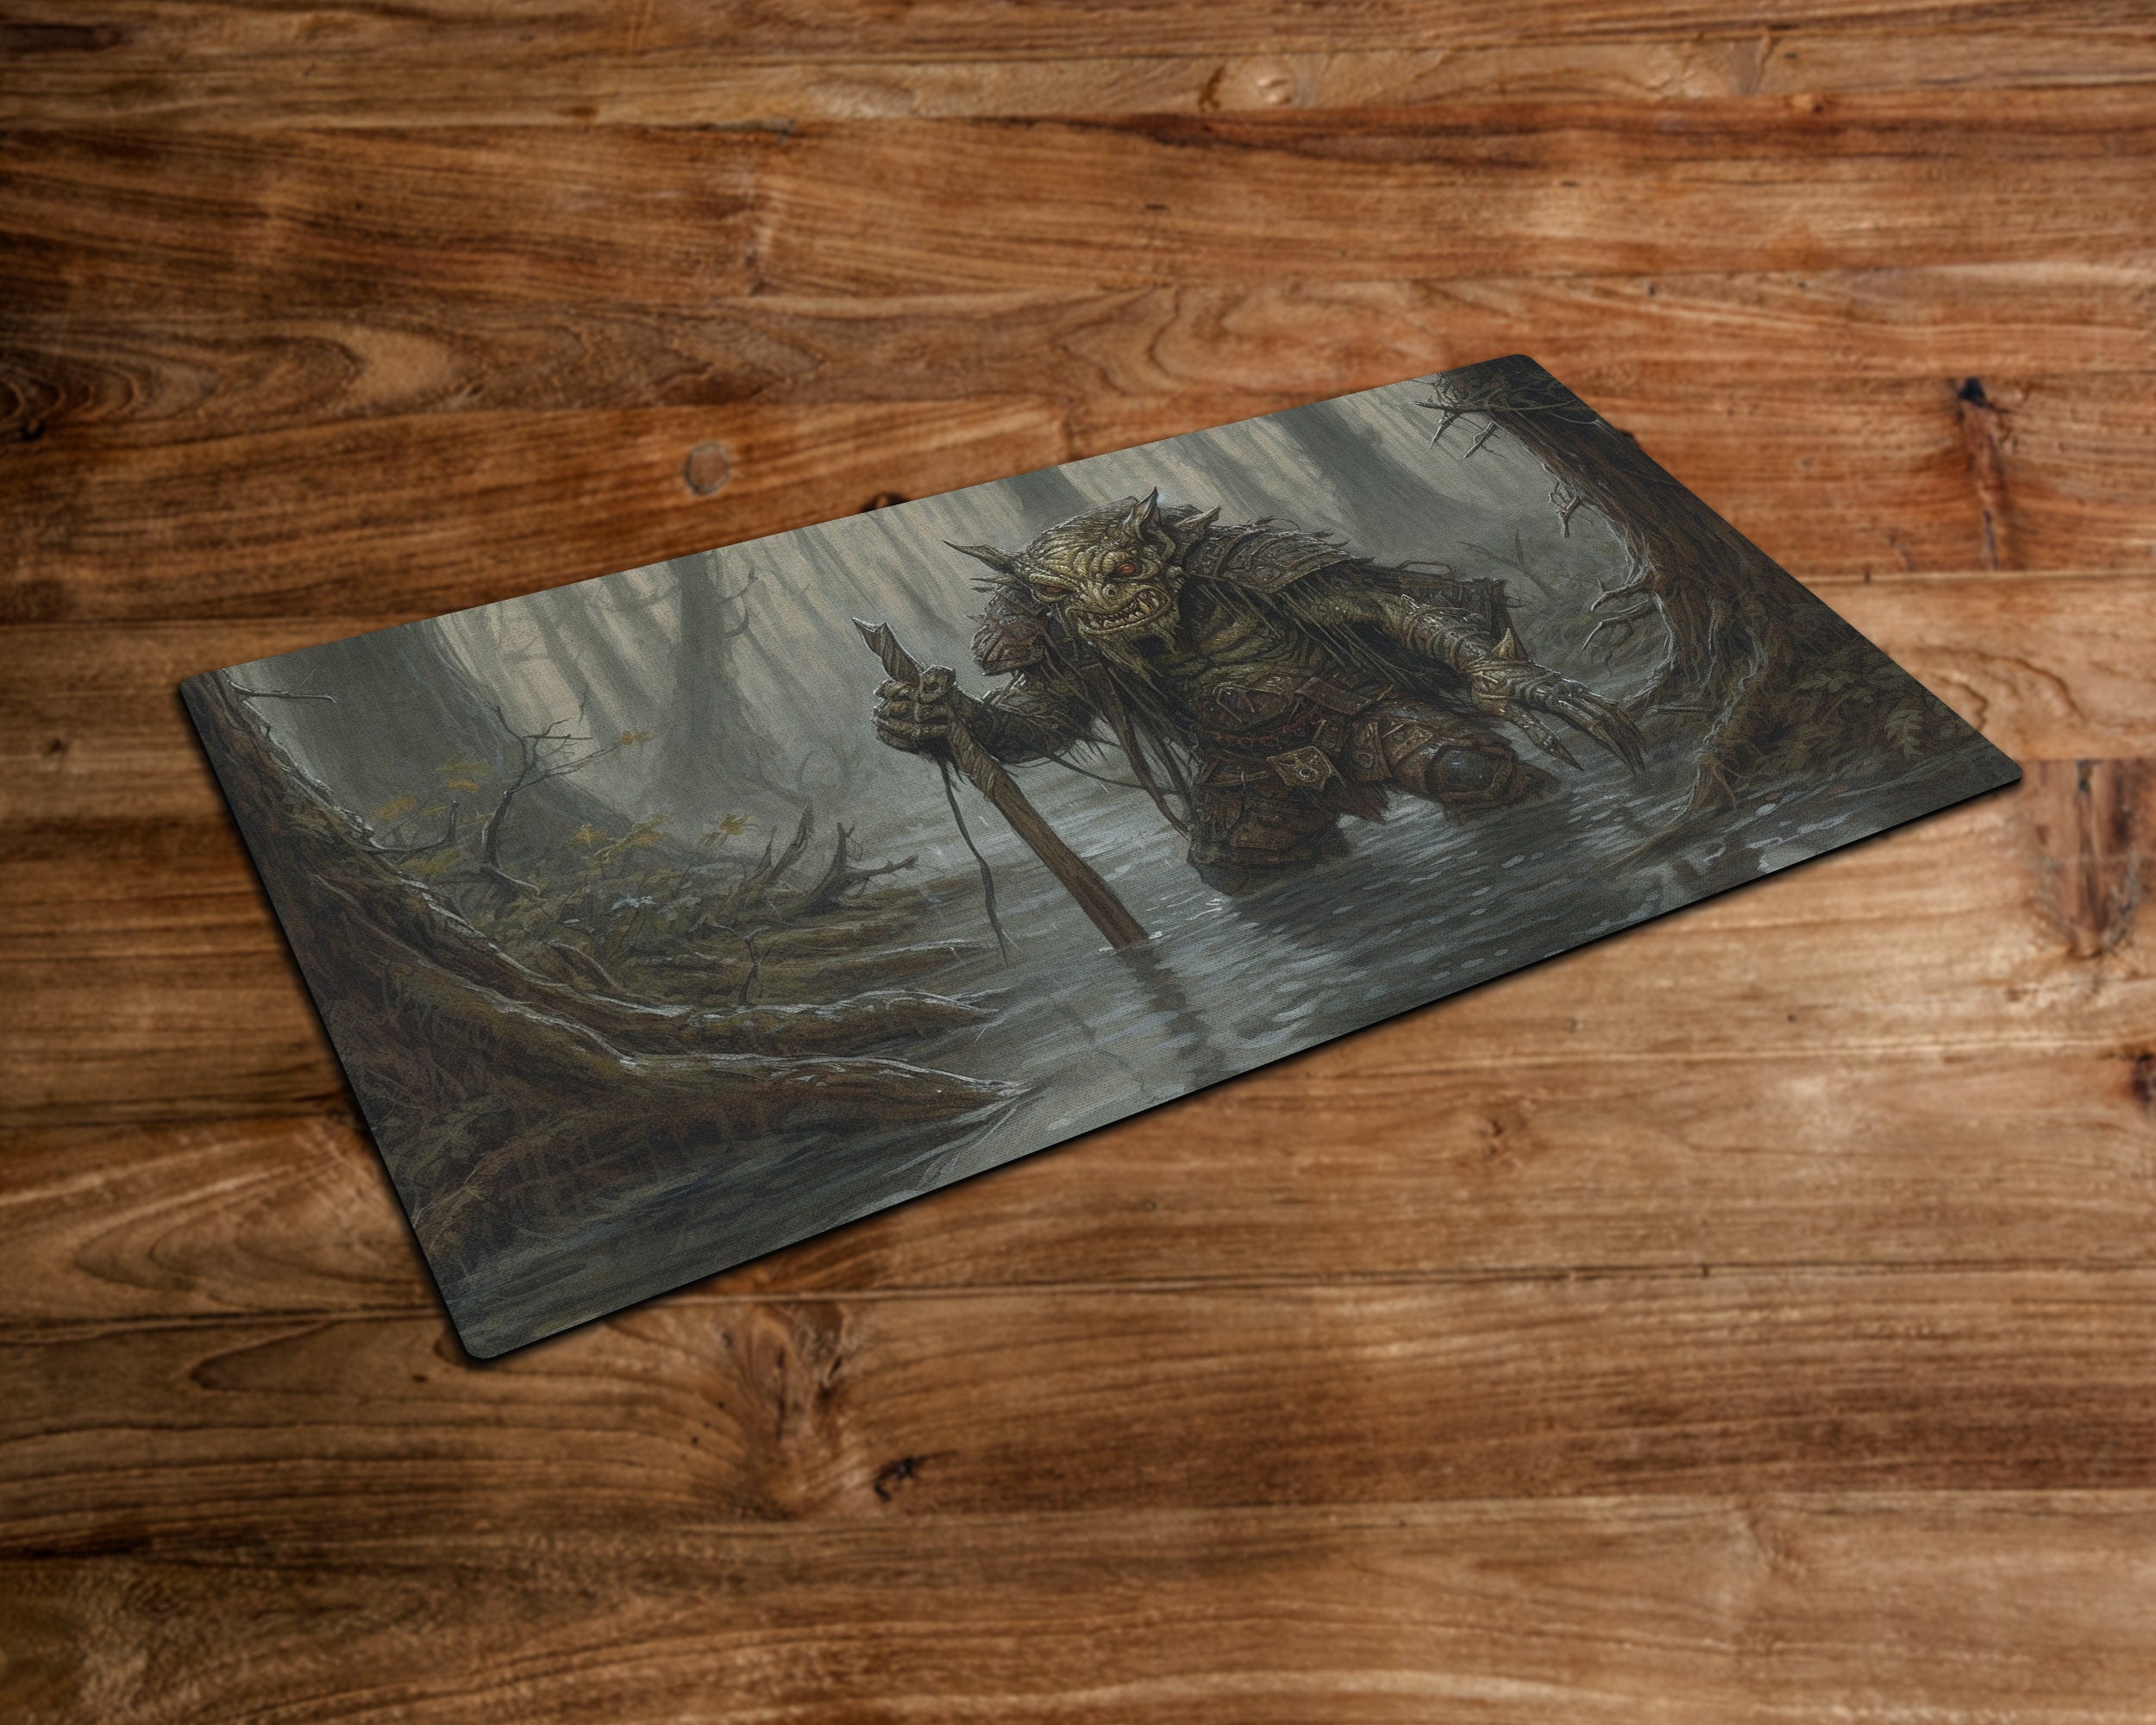 The Swamp Dweller - MTG Playmat - 24 x 14 inches -Playmat for TCG - Handcrafted